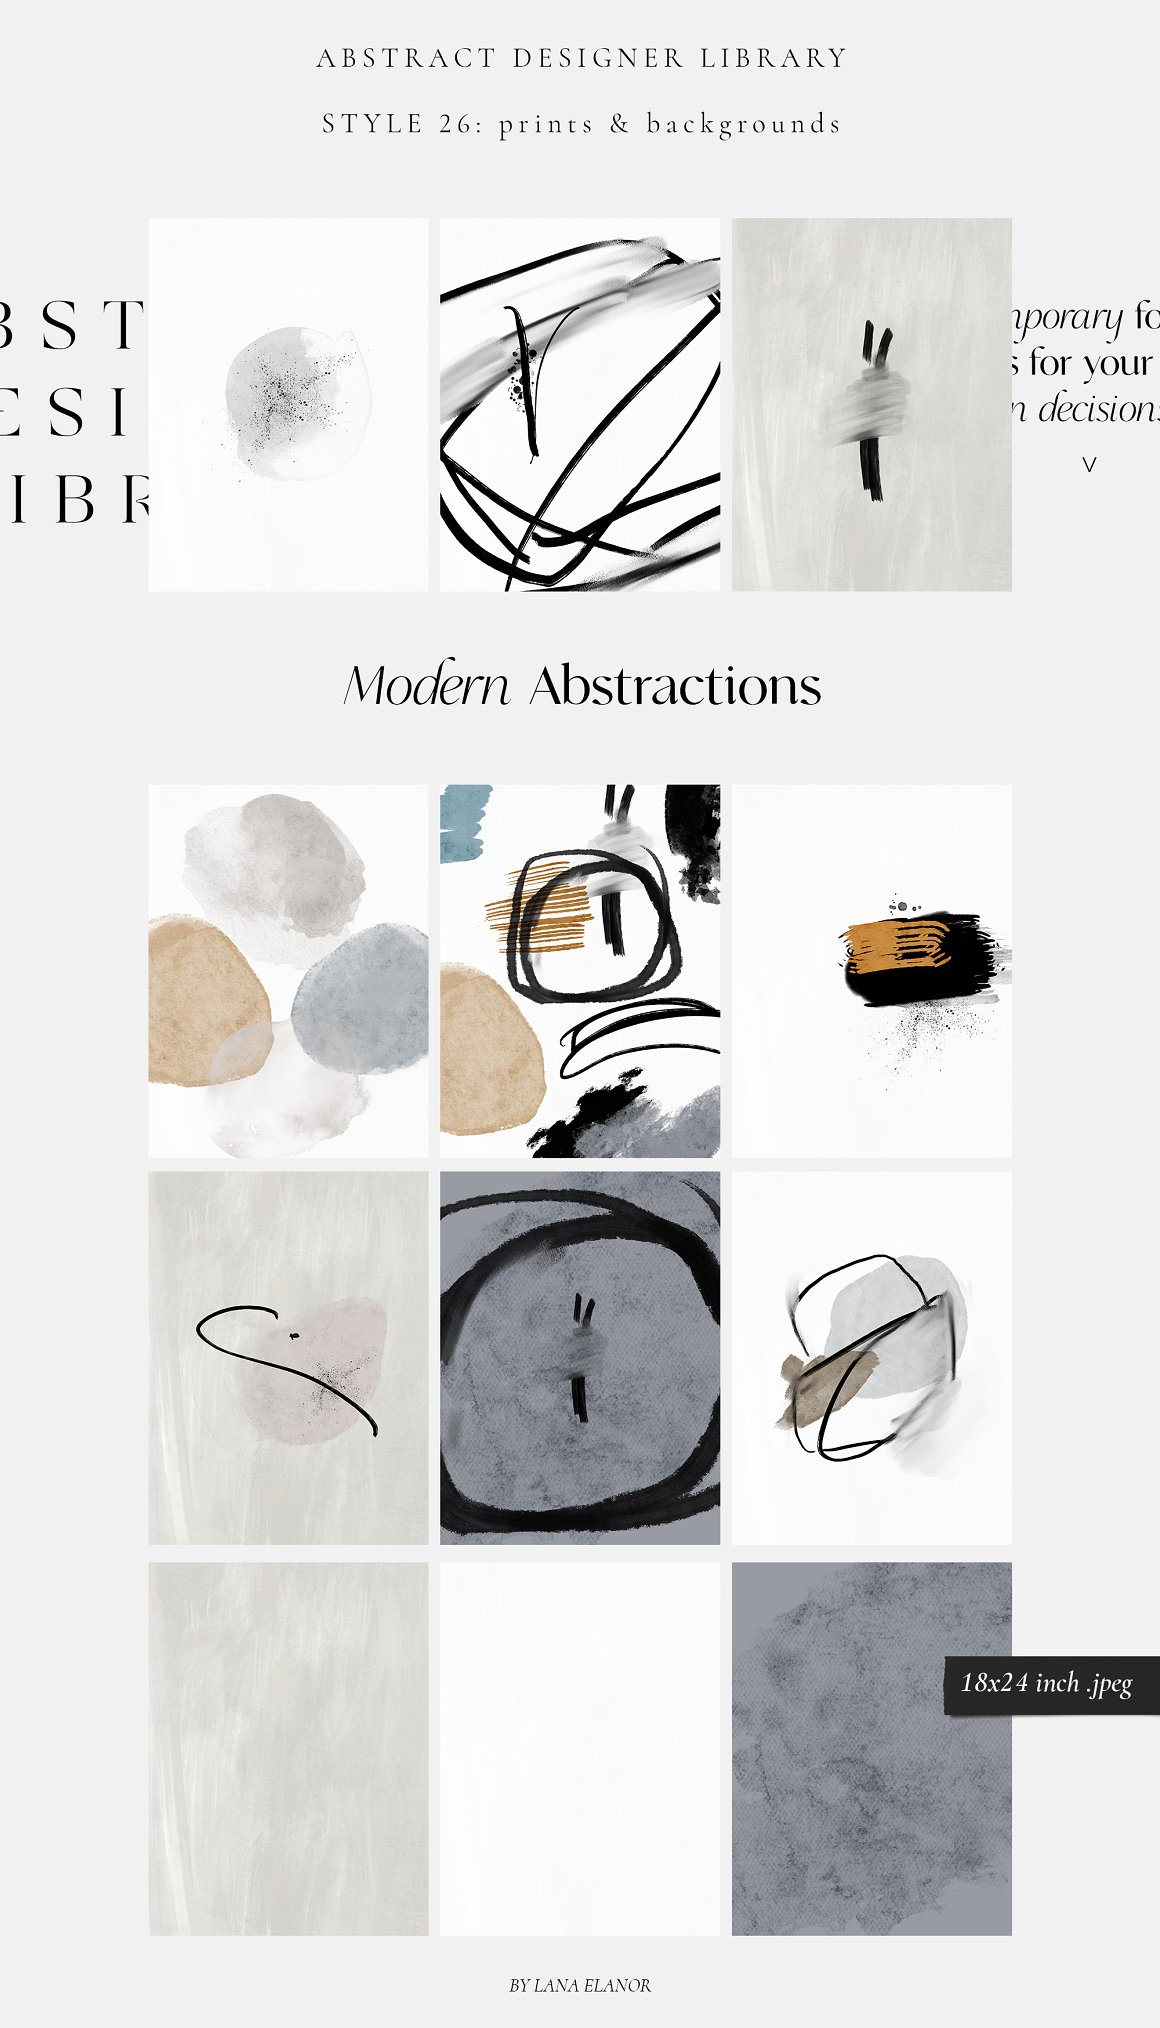 Modern abstractions library on a gray background.